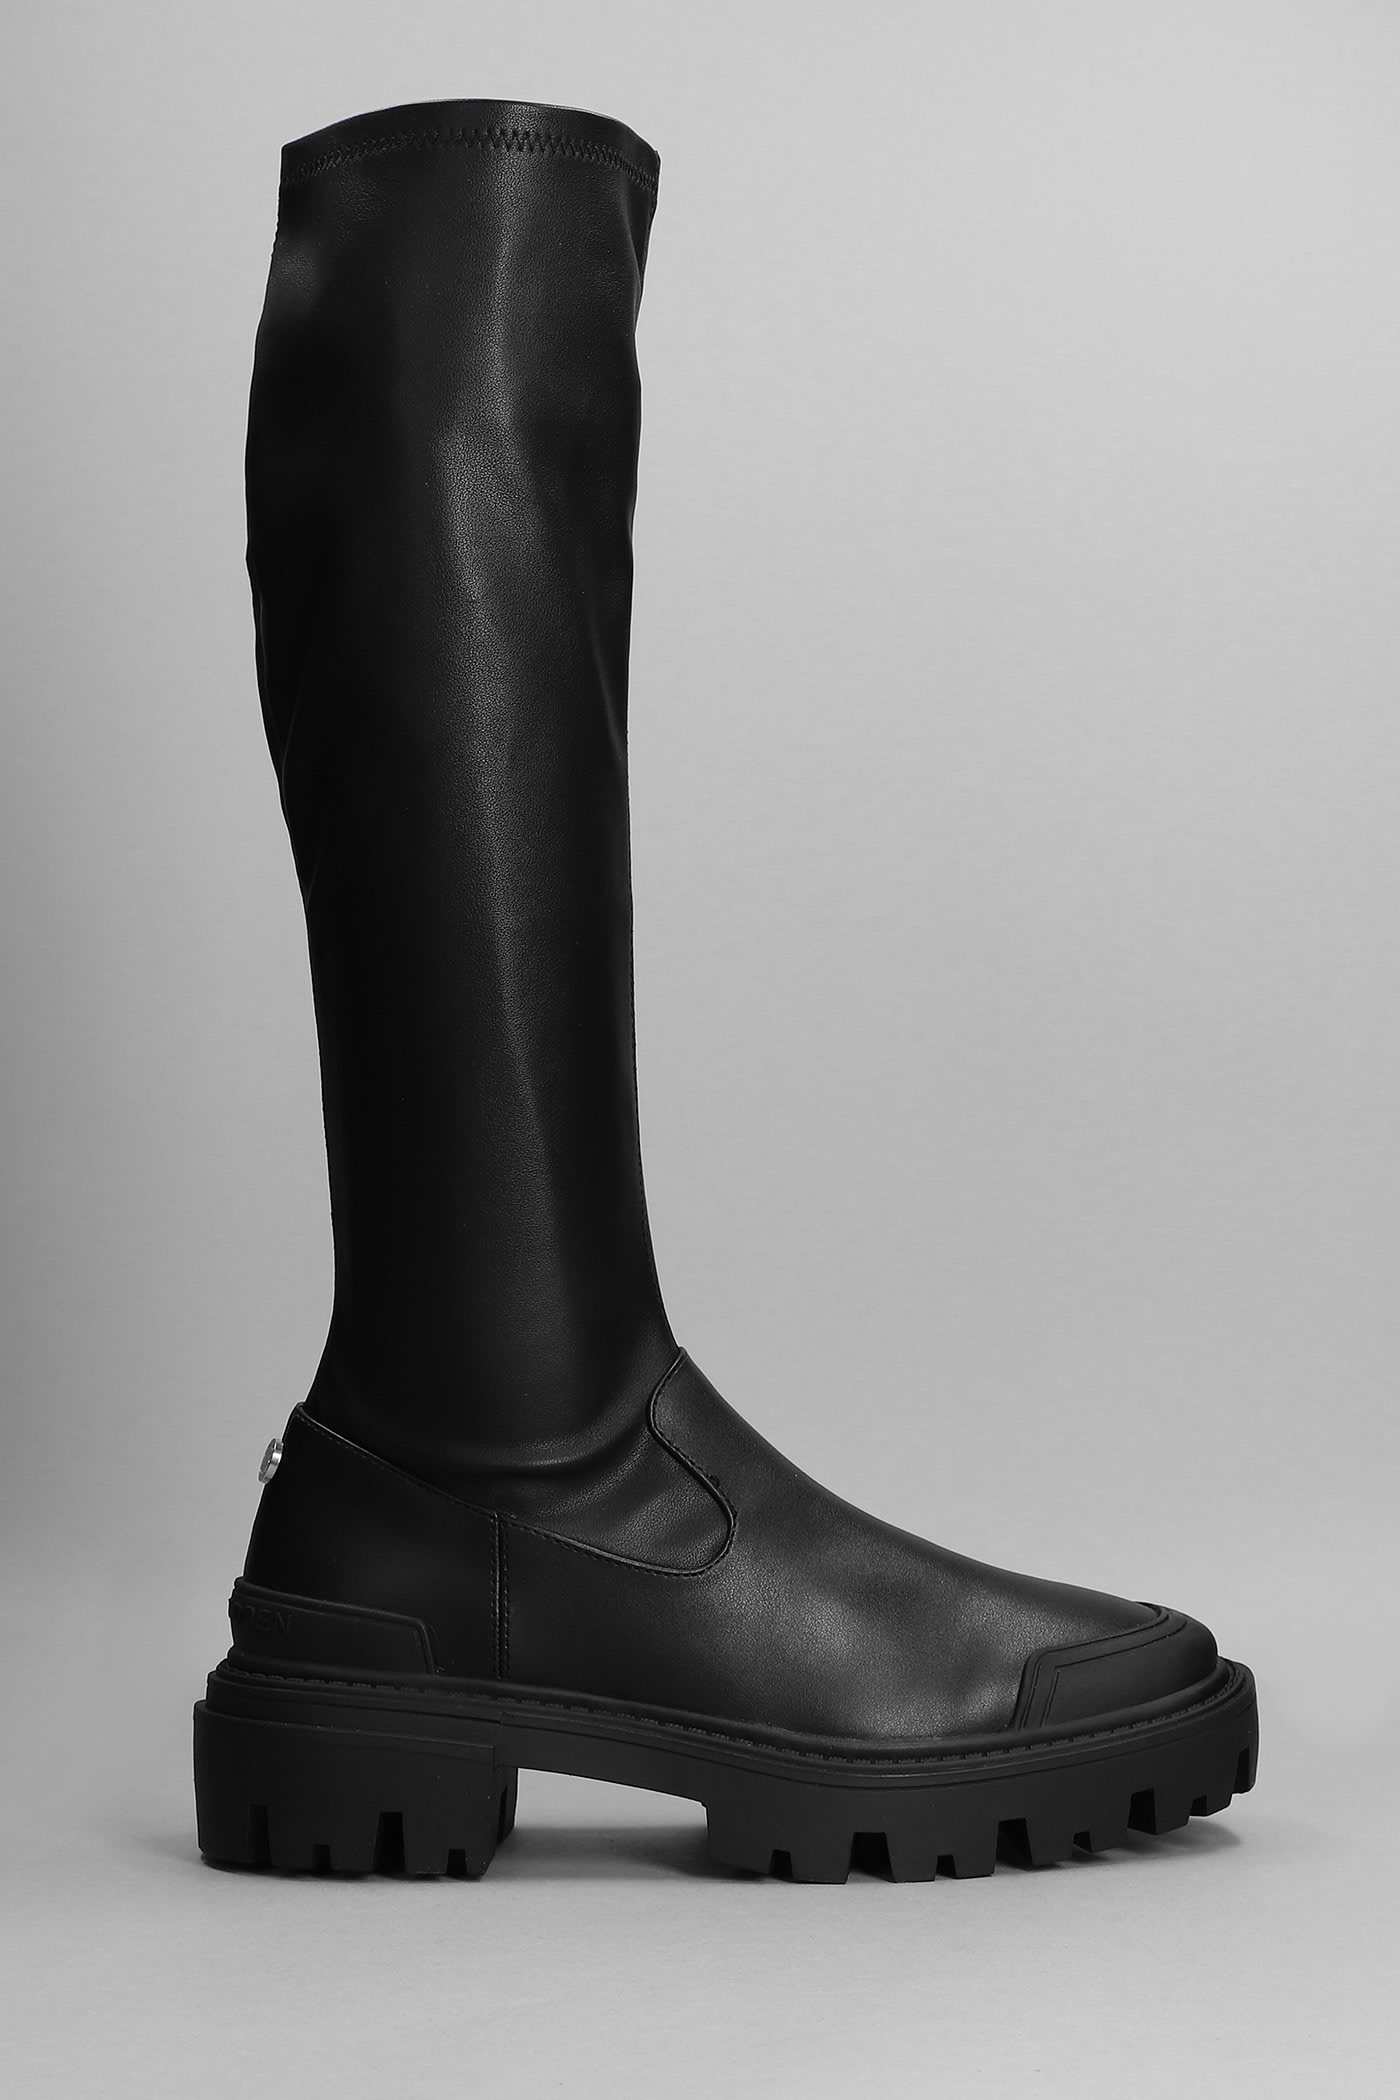 Steve Madden Avalanche Low Heels Boots In Black Leather | ModeSens